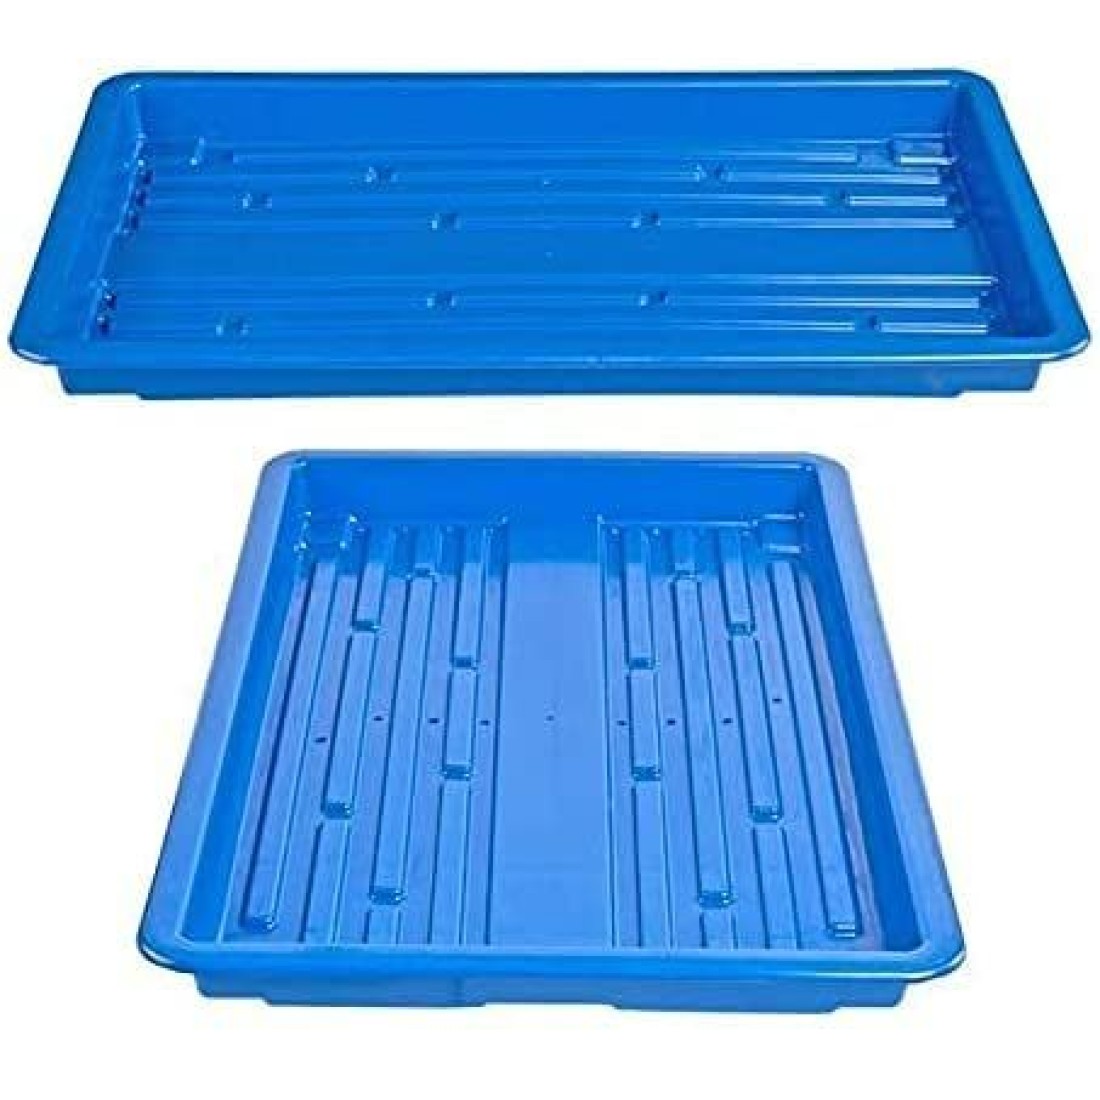 Hydroponics Germination Plastic Tray for Fodder Maize/microgreens/Seedling/Wheatgrass (Blue), pack of 3 trays 1